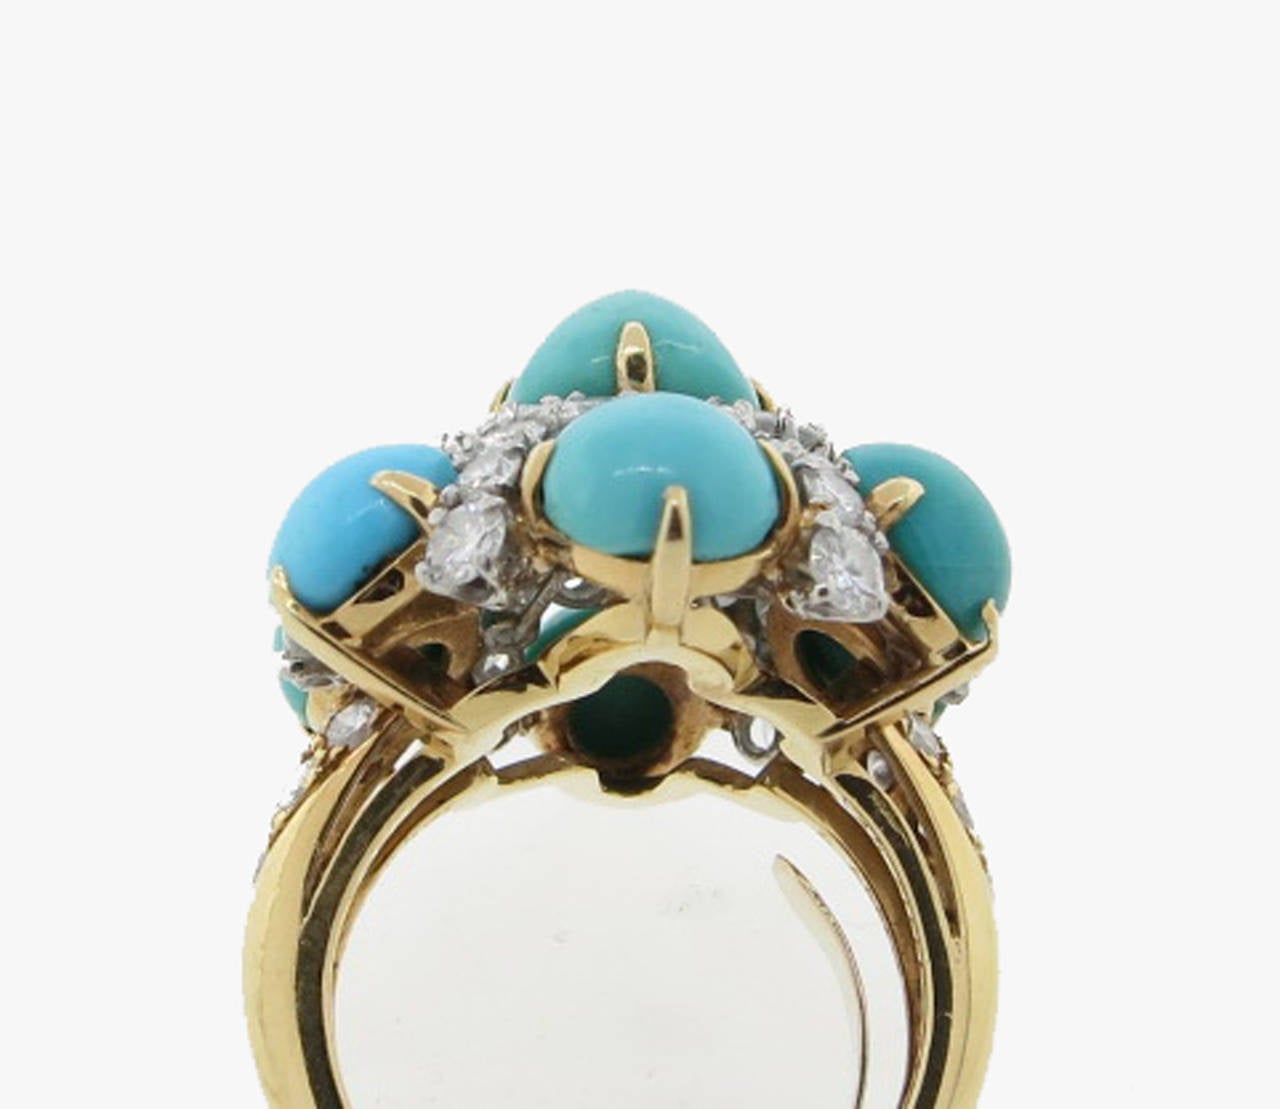 Glorious Van Cleef & Arpels Turquoise Diamond Gold Cocktail Ring 4